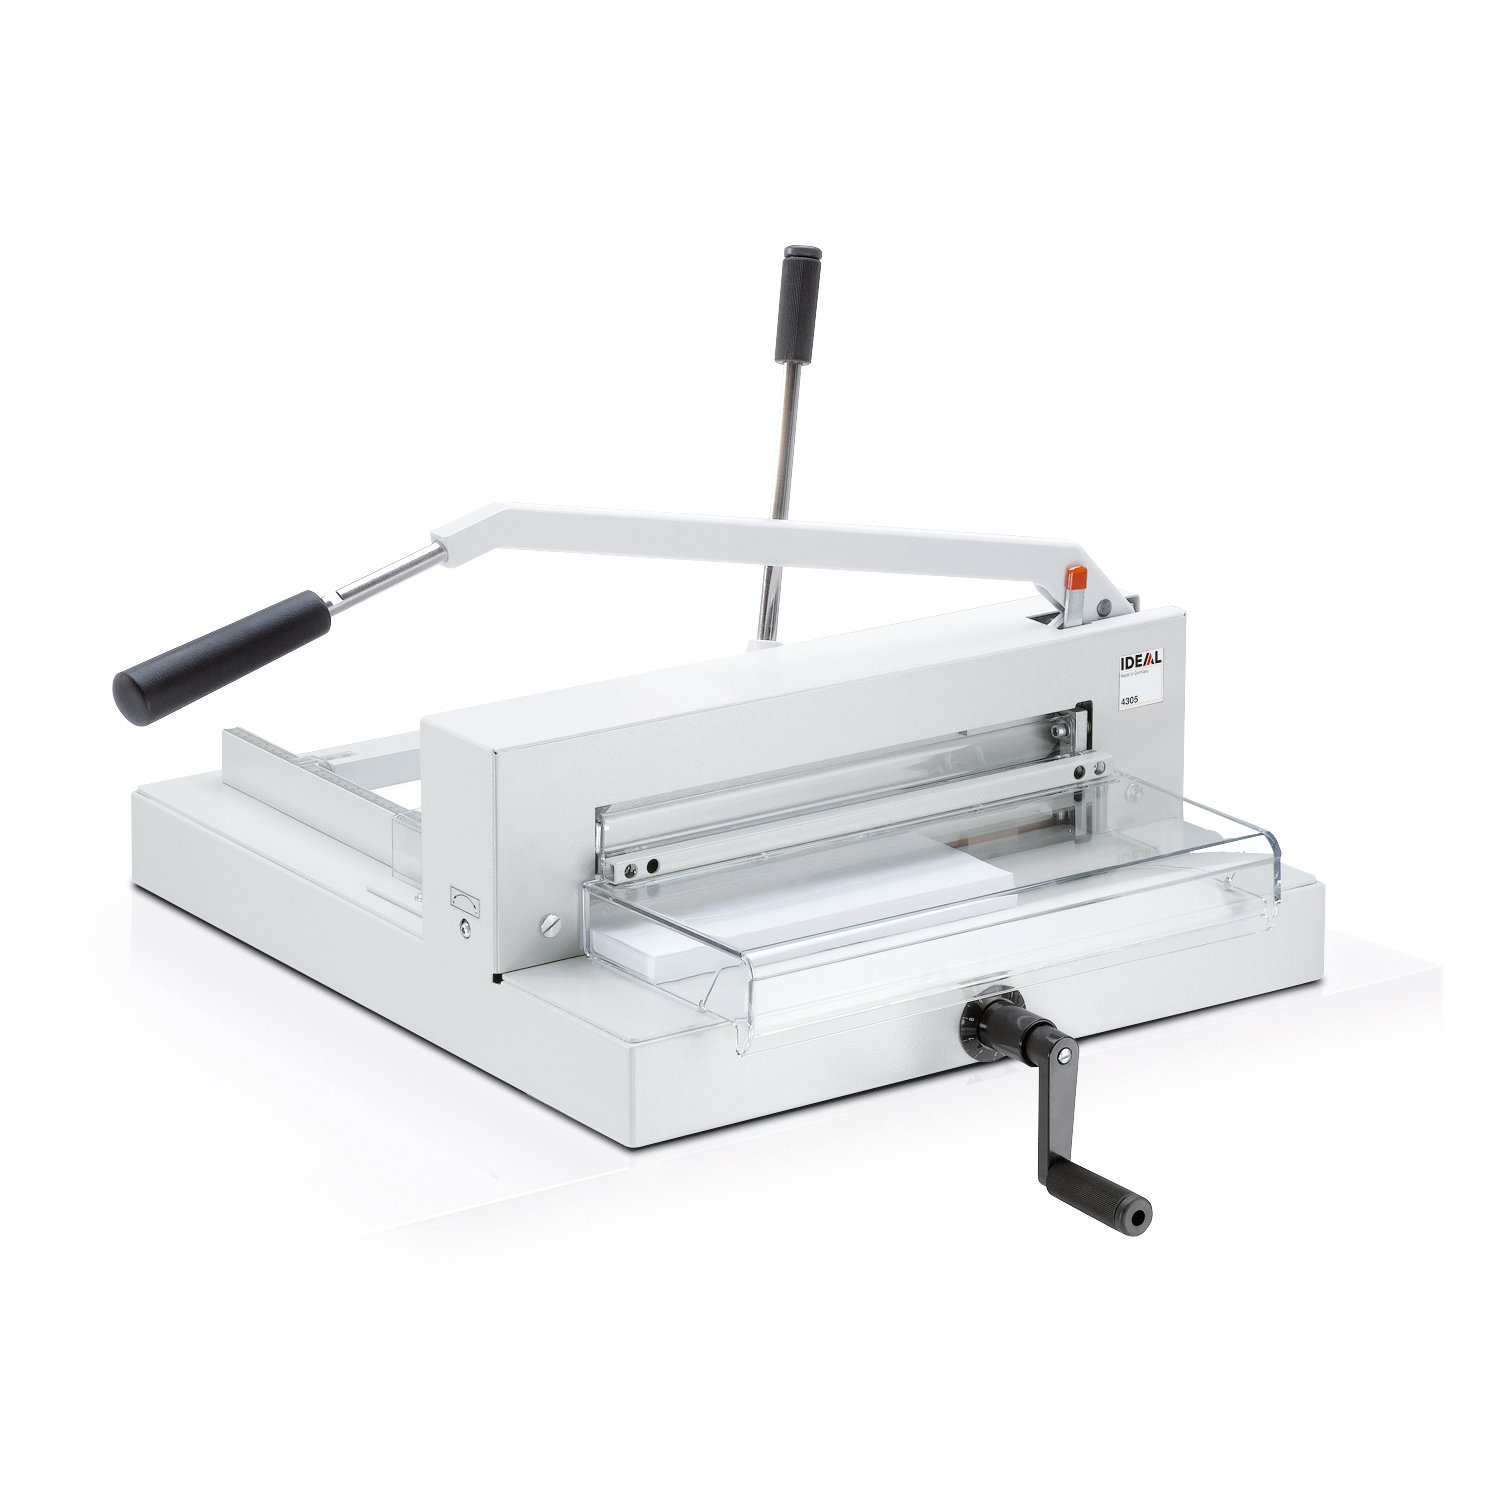 Ideal 4305 Manual Guillotine - Click Image to Close